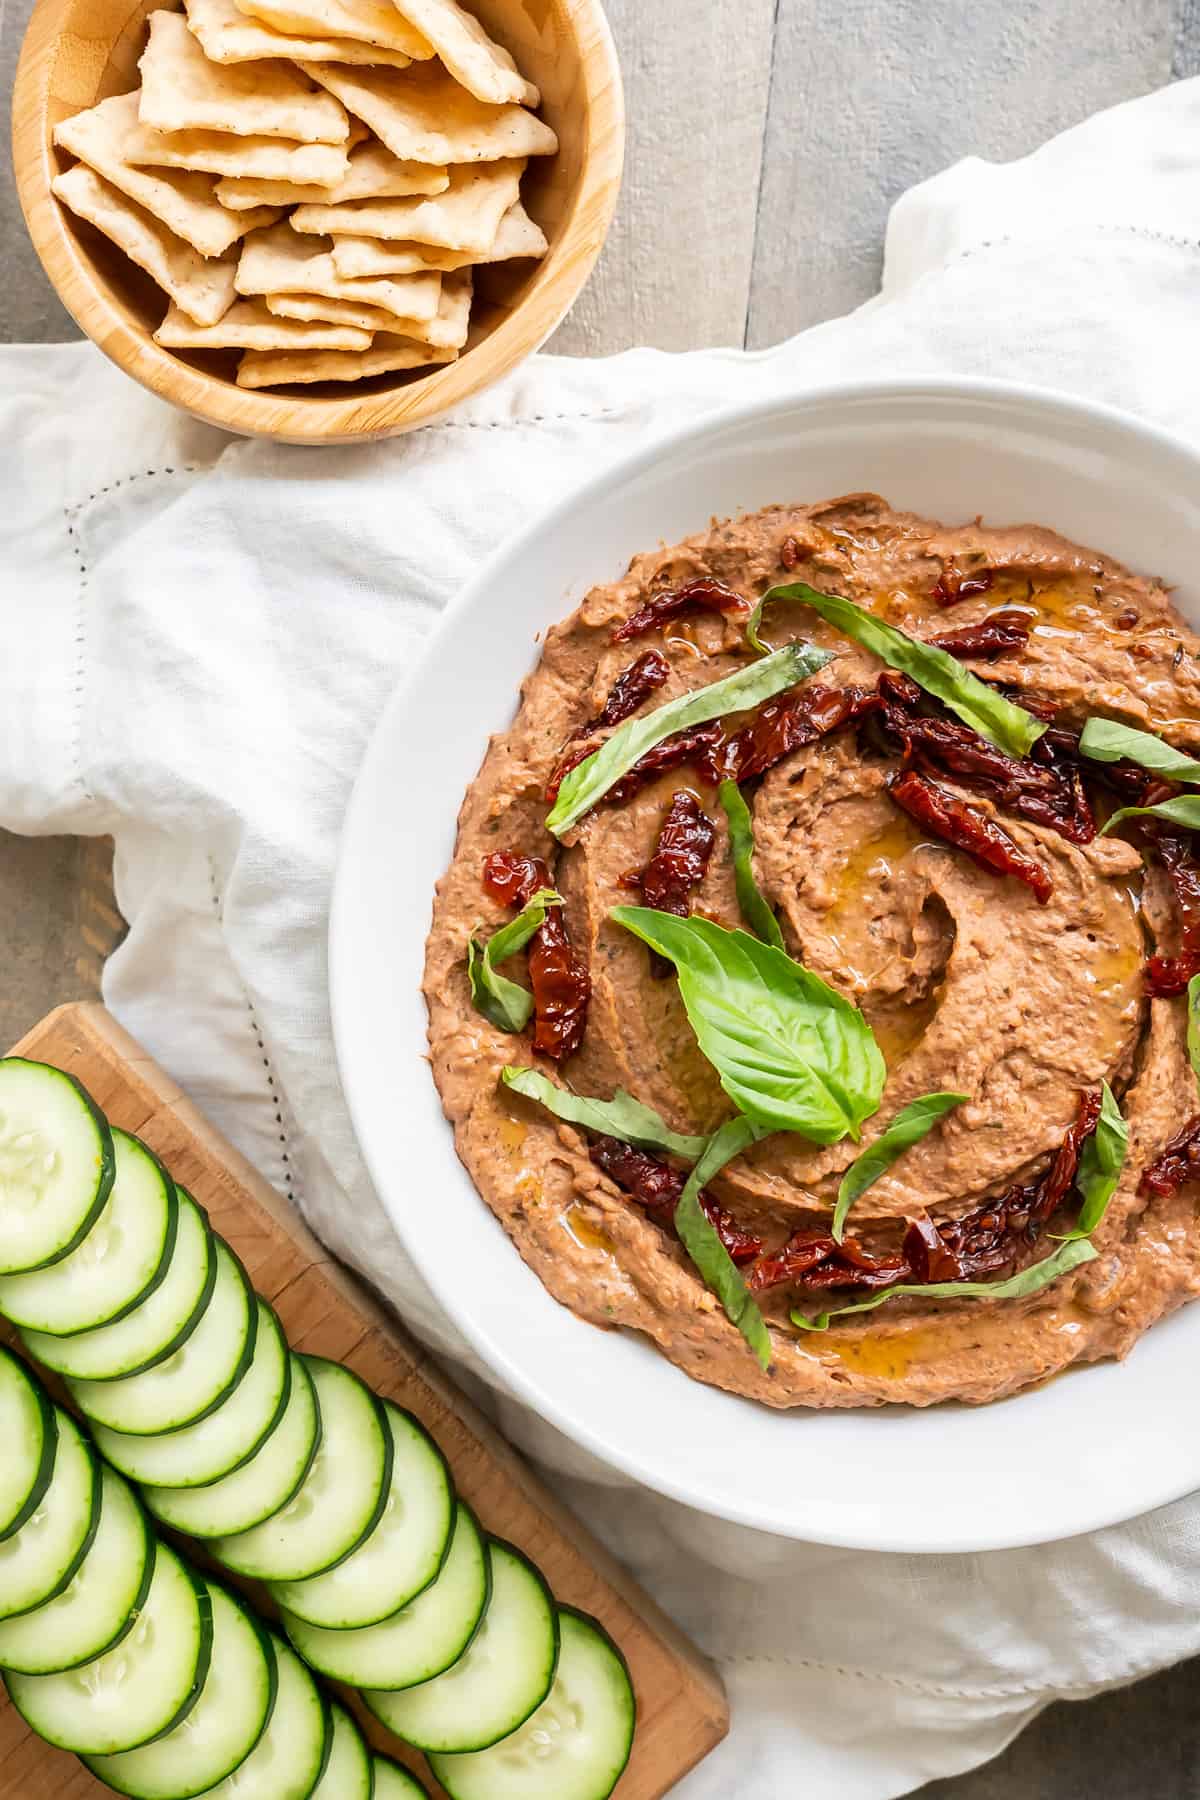 Creamy black bean hummus with a side of sliced cucumber and gluten-free crackers.